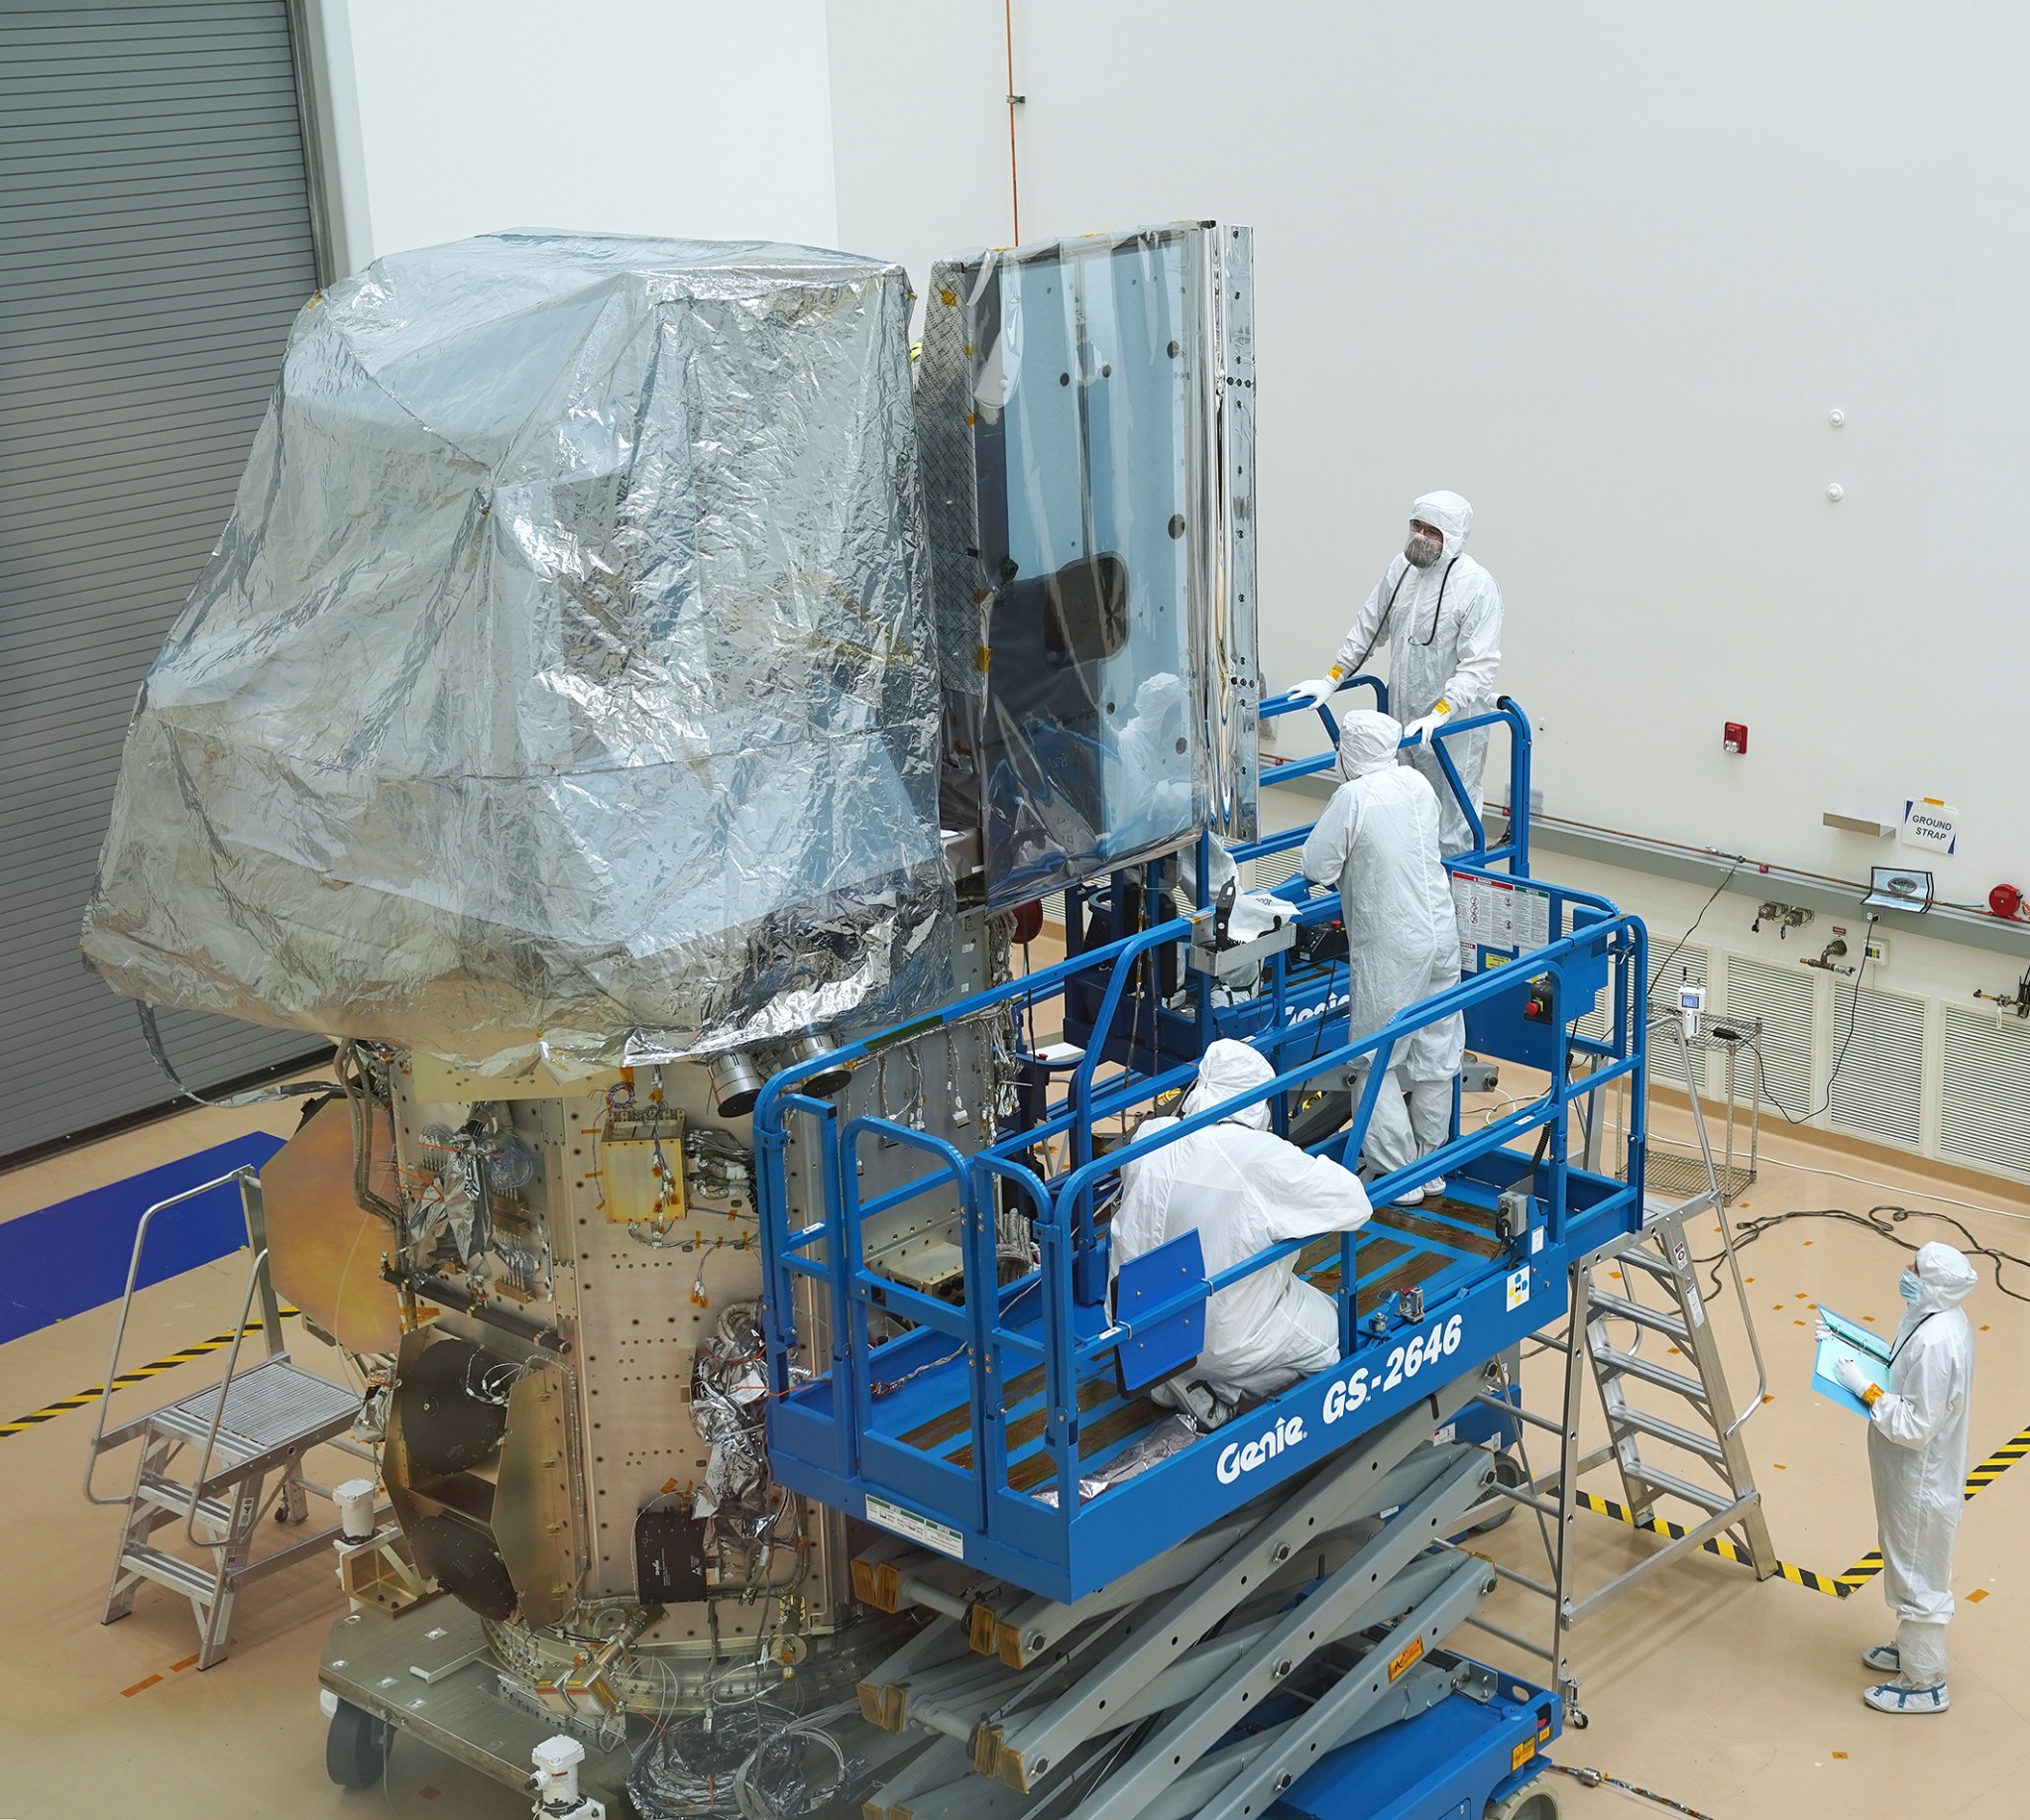 The Landsat 9 satellite stands in a cleanroom, with foil covering part of the top. The solar panel extends out one side, covered in clear plastic. Engineers in white cleanroom suits with masks and hoods stand and crouch on blue mechanical lifts, inspecting the satellite.